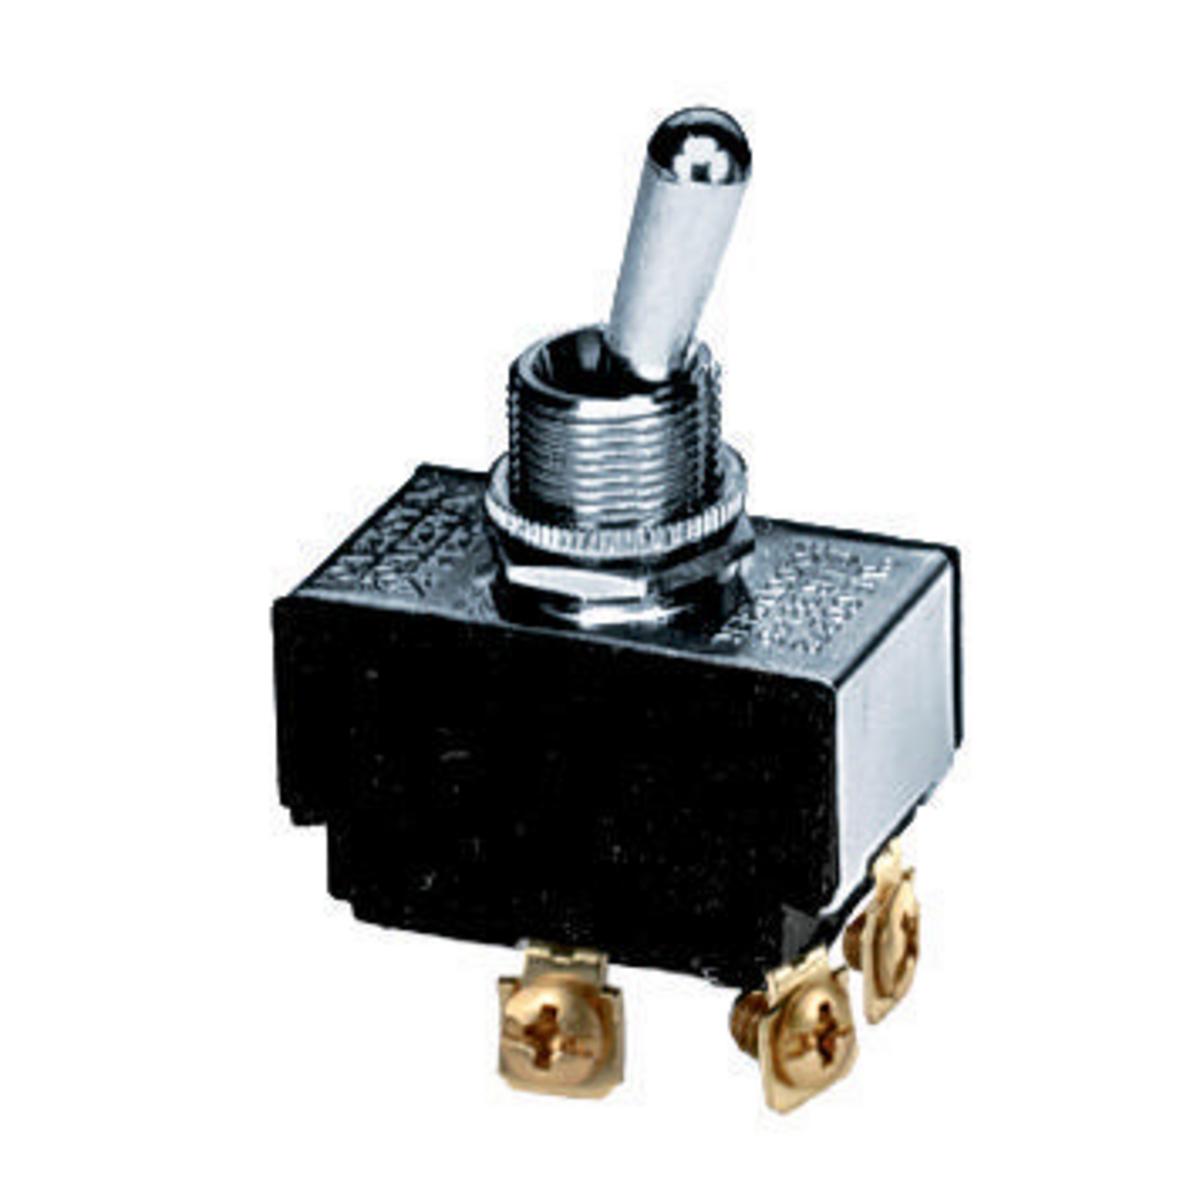 Hubbell HBL21 Switches and Lighting Controls, Commercial Grade, Panel Mount and Specialty Switches, Bat Handle Switches, Double Pole Single Throw 10A 250V/10A 125V, Screw Terminals,  ; Nickel Plated for Corrosion Resistance ; 